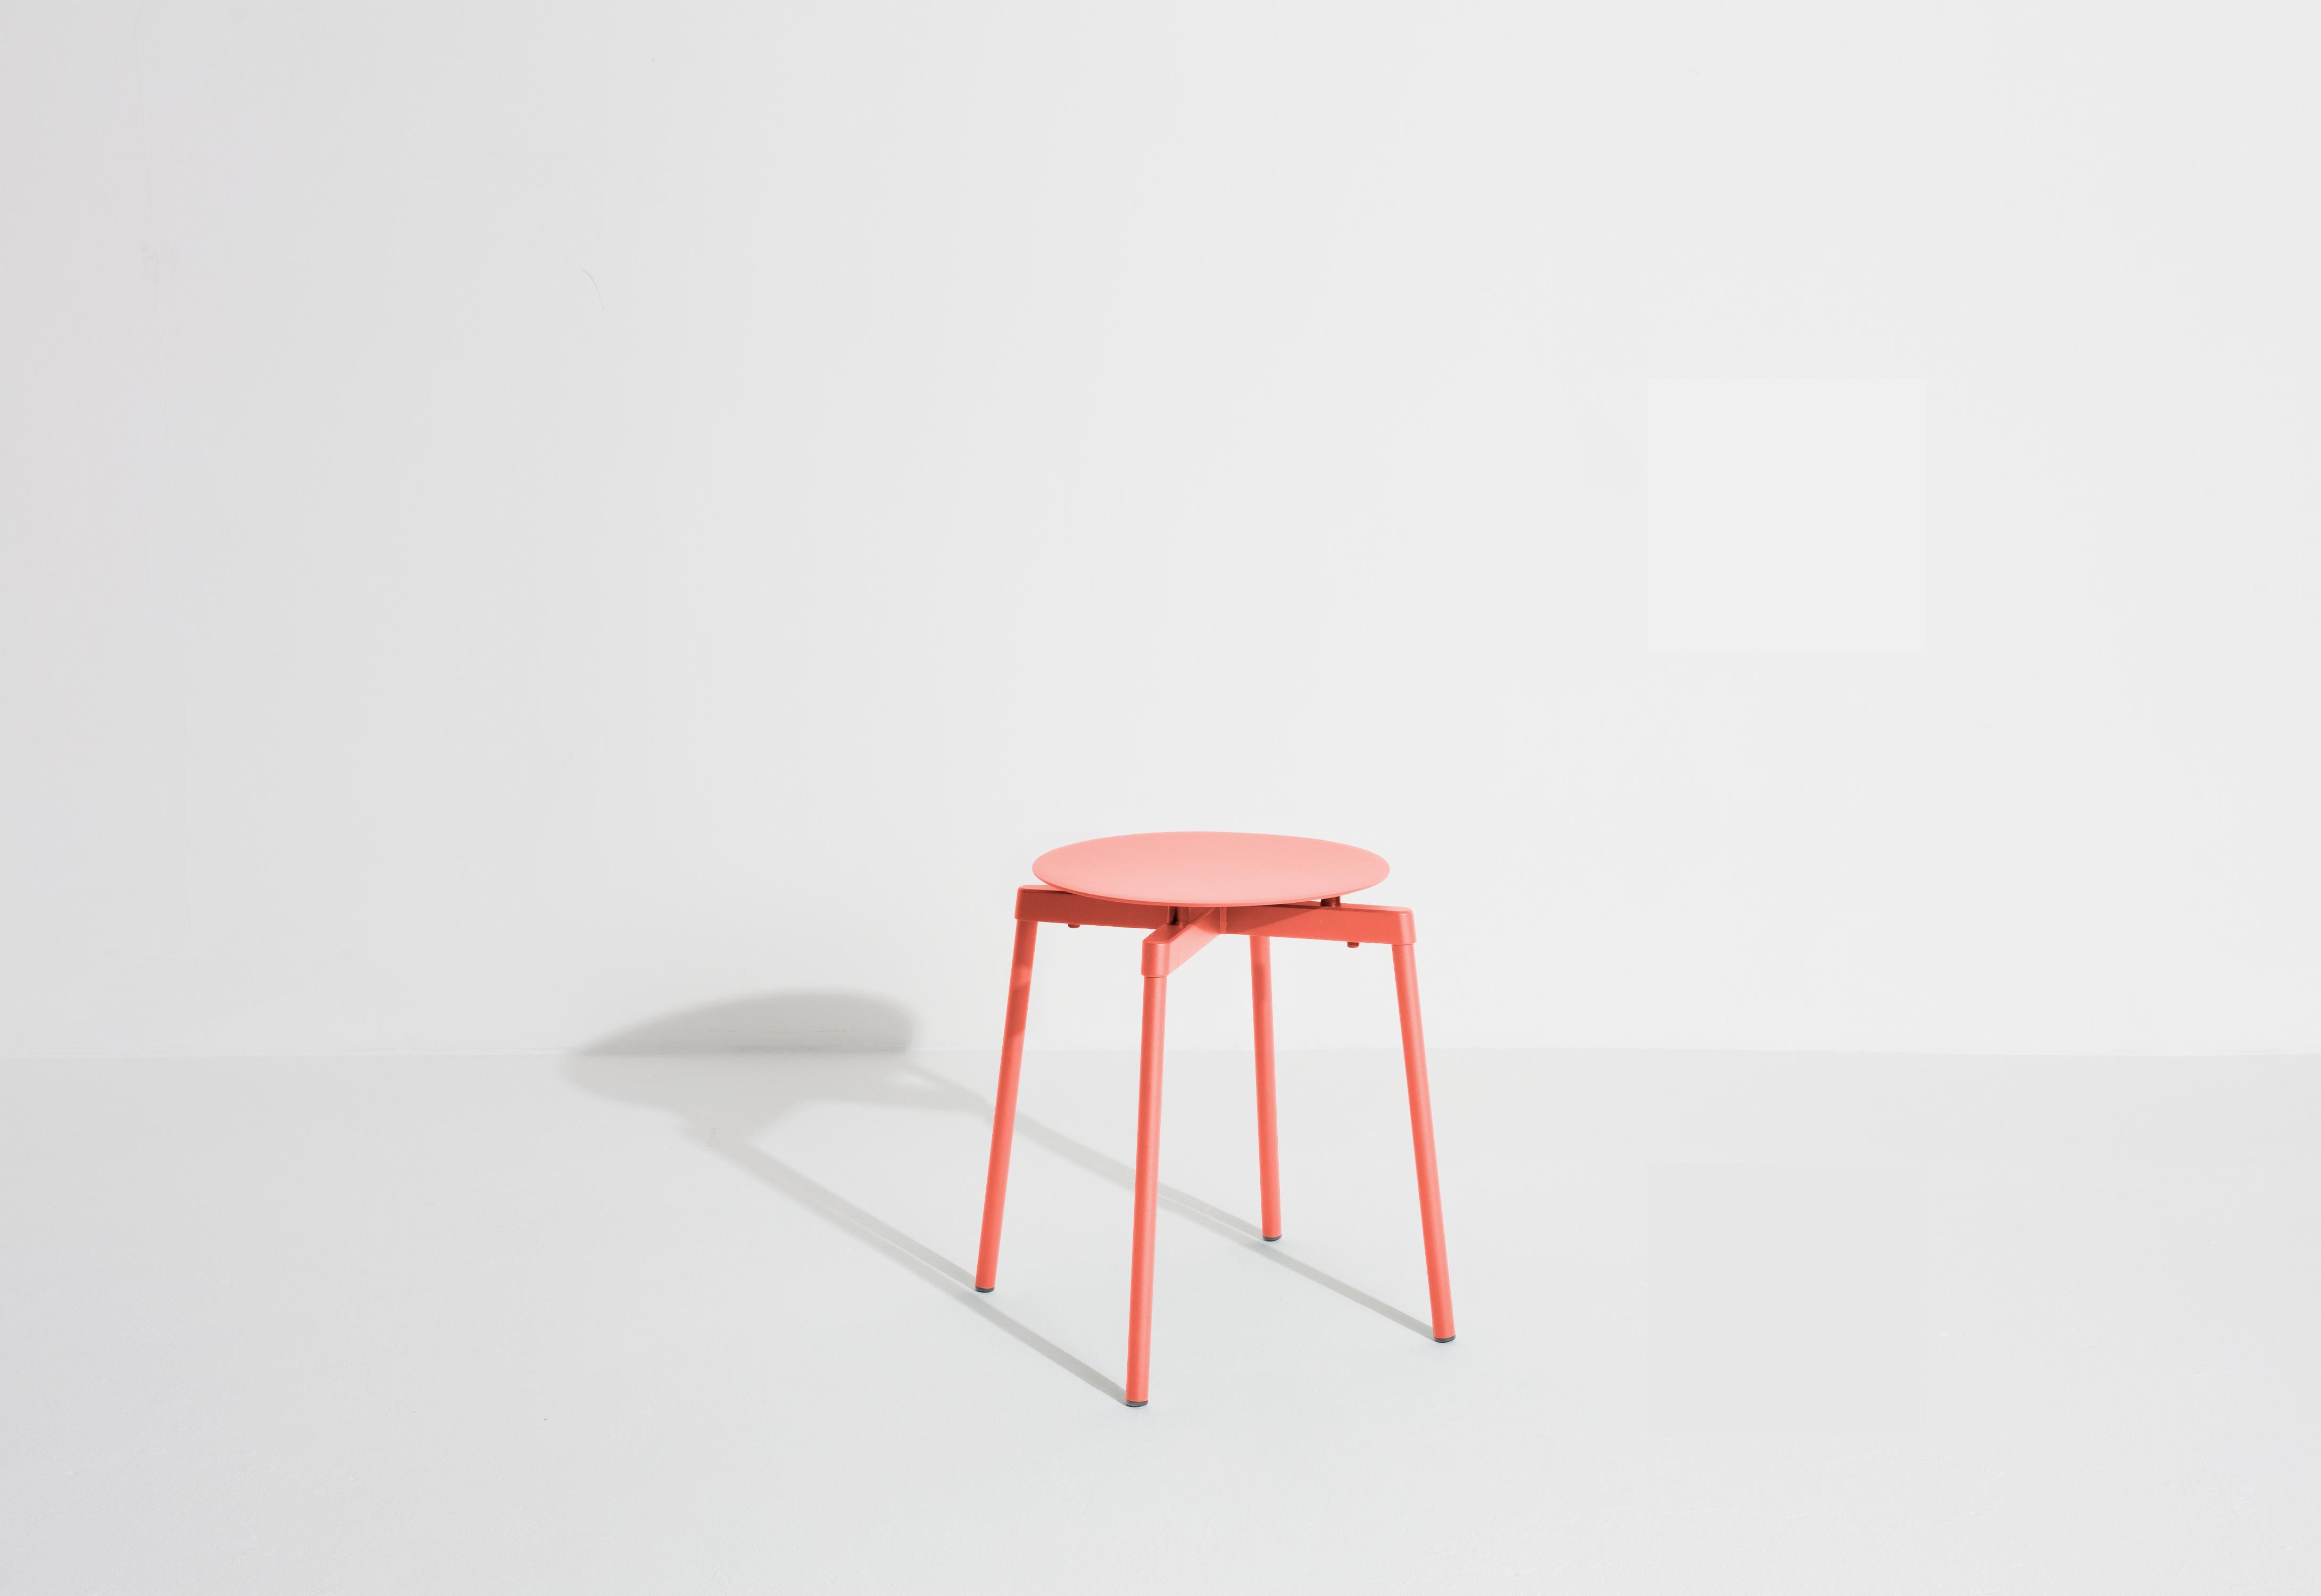 Chinese Petite Friture Fromme Stool in Coral Aluminium by Tom Chung, 2020 For Sale